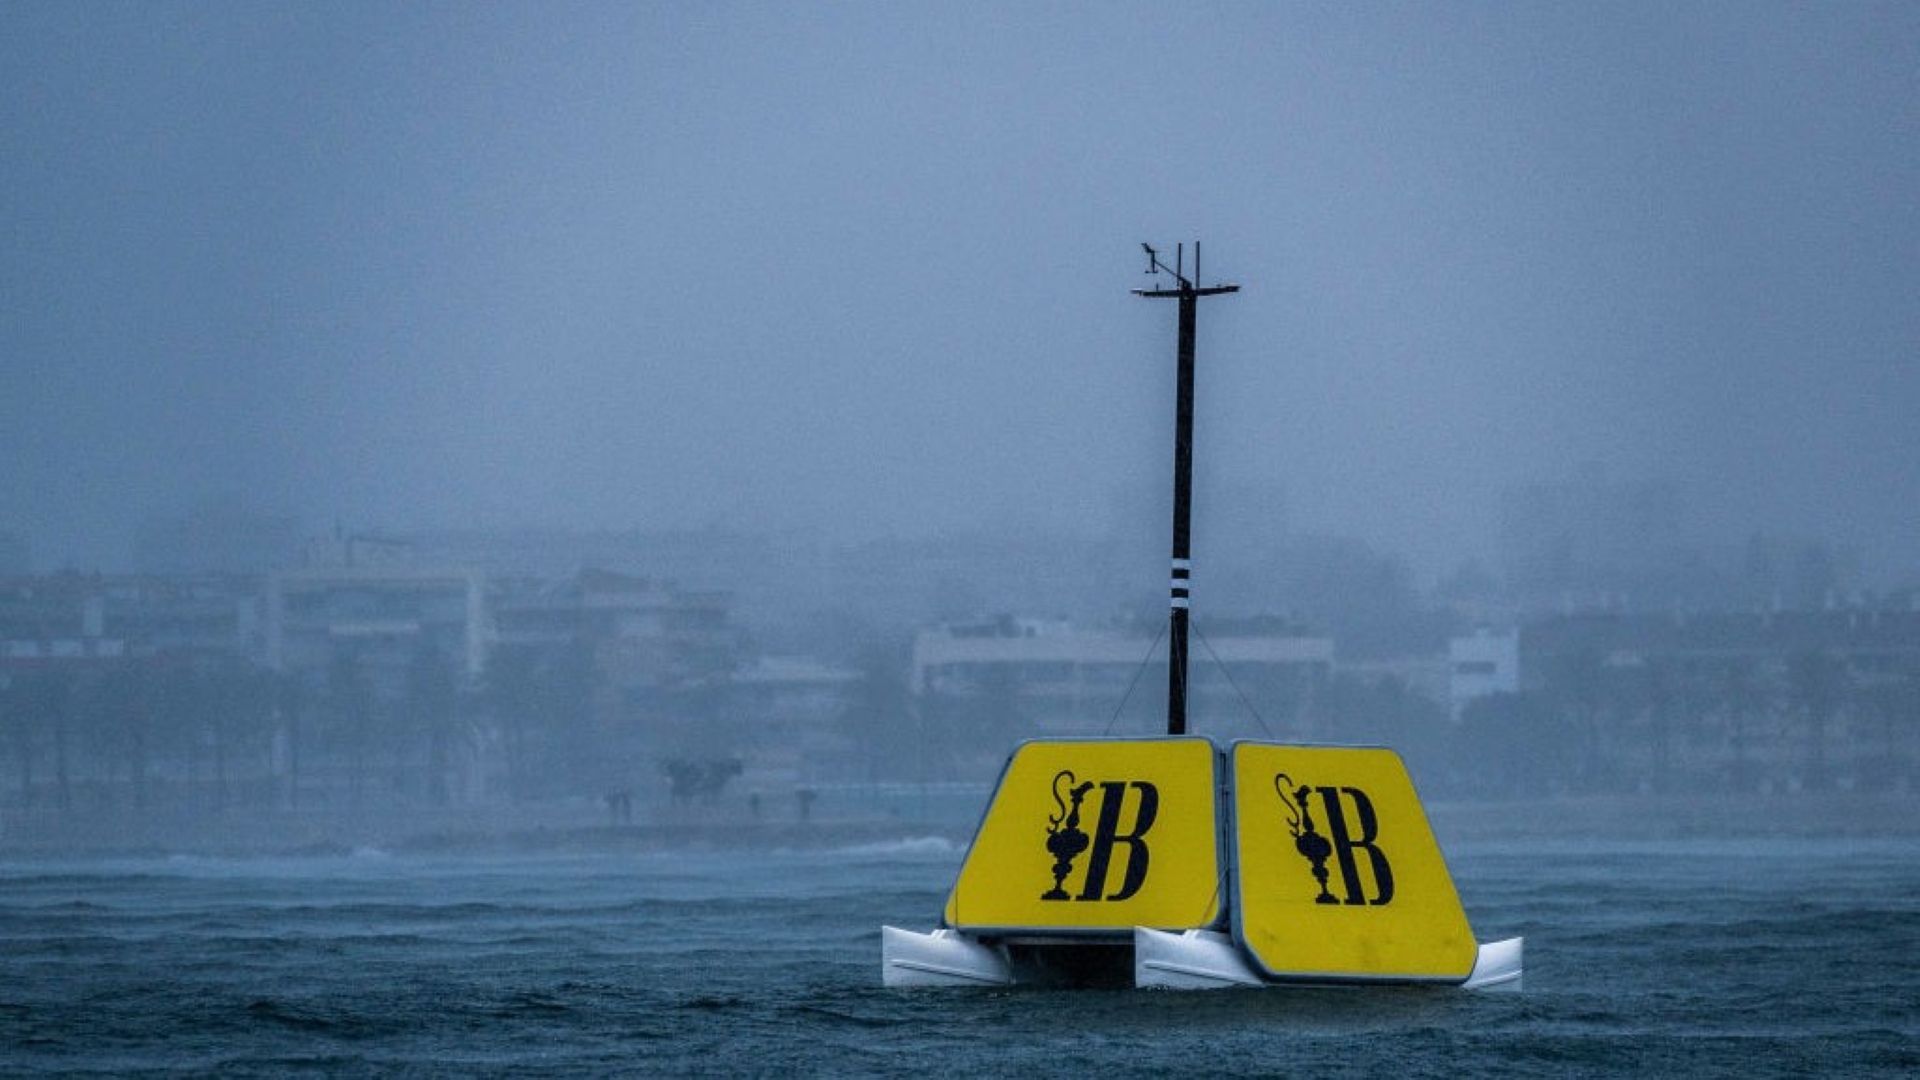 What Went Wrong in the Deadly America's Cup Crash